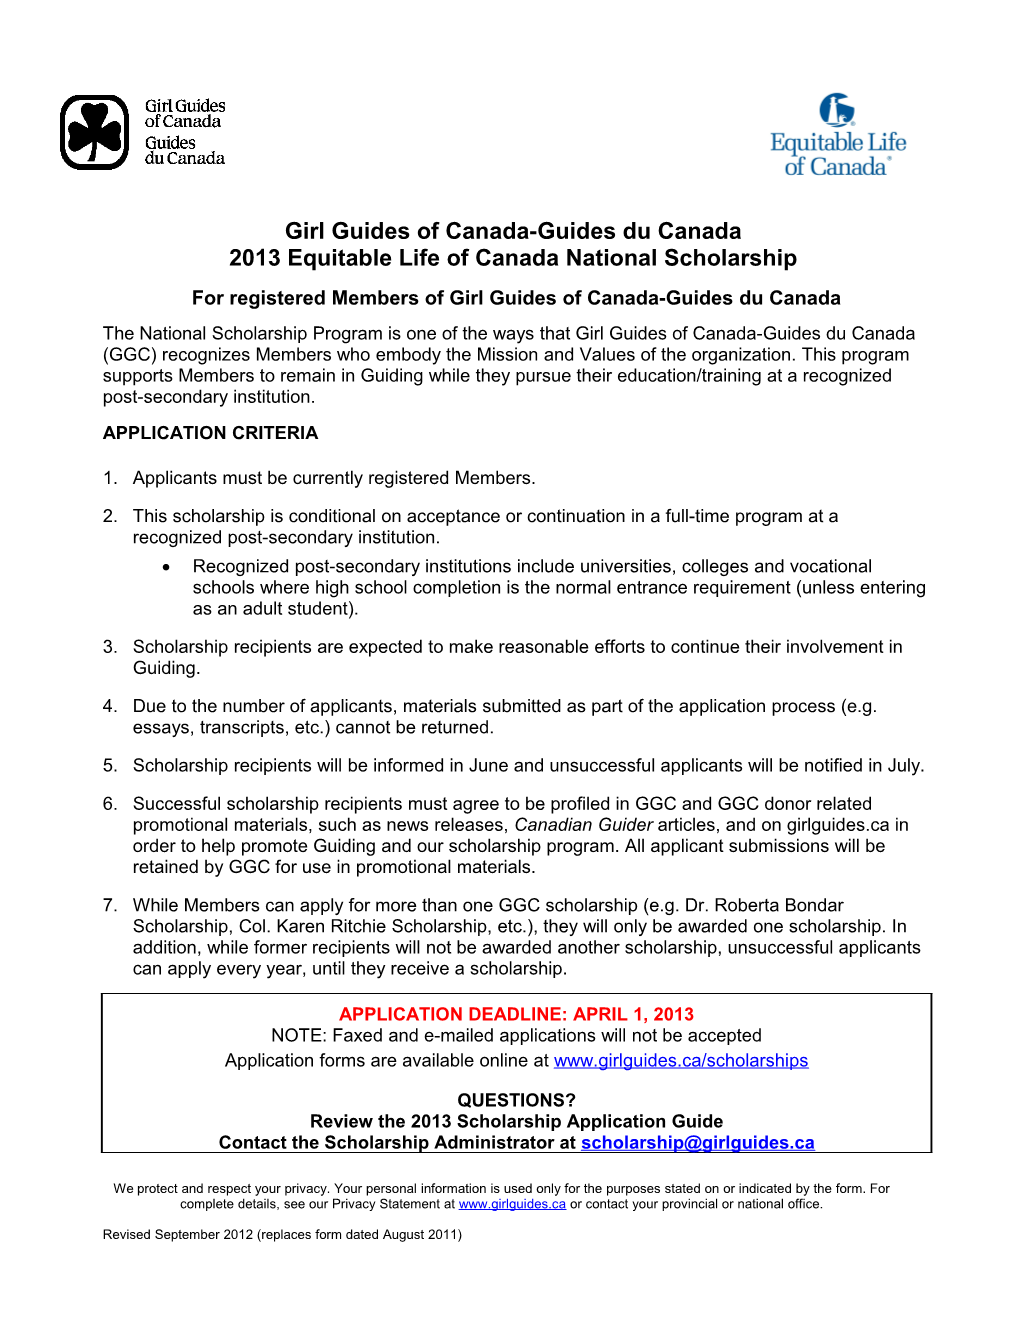 2013 Equitable Life of Canada National Scholarship